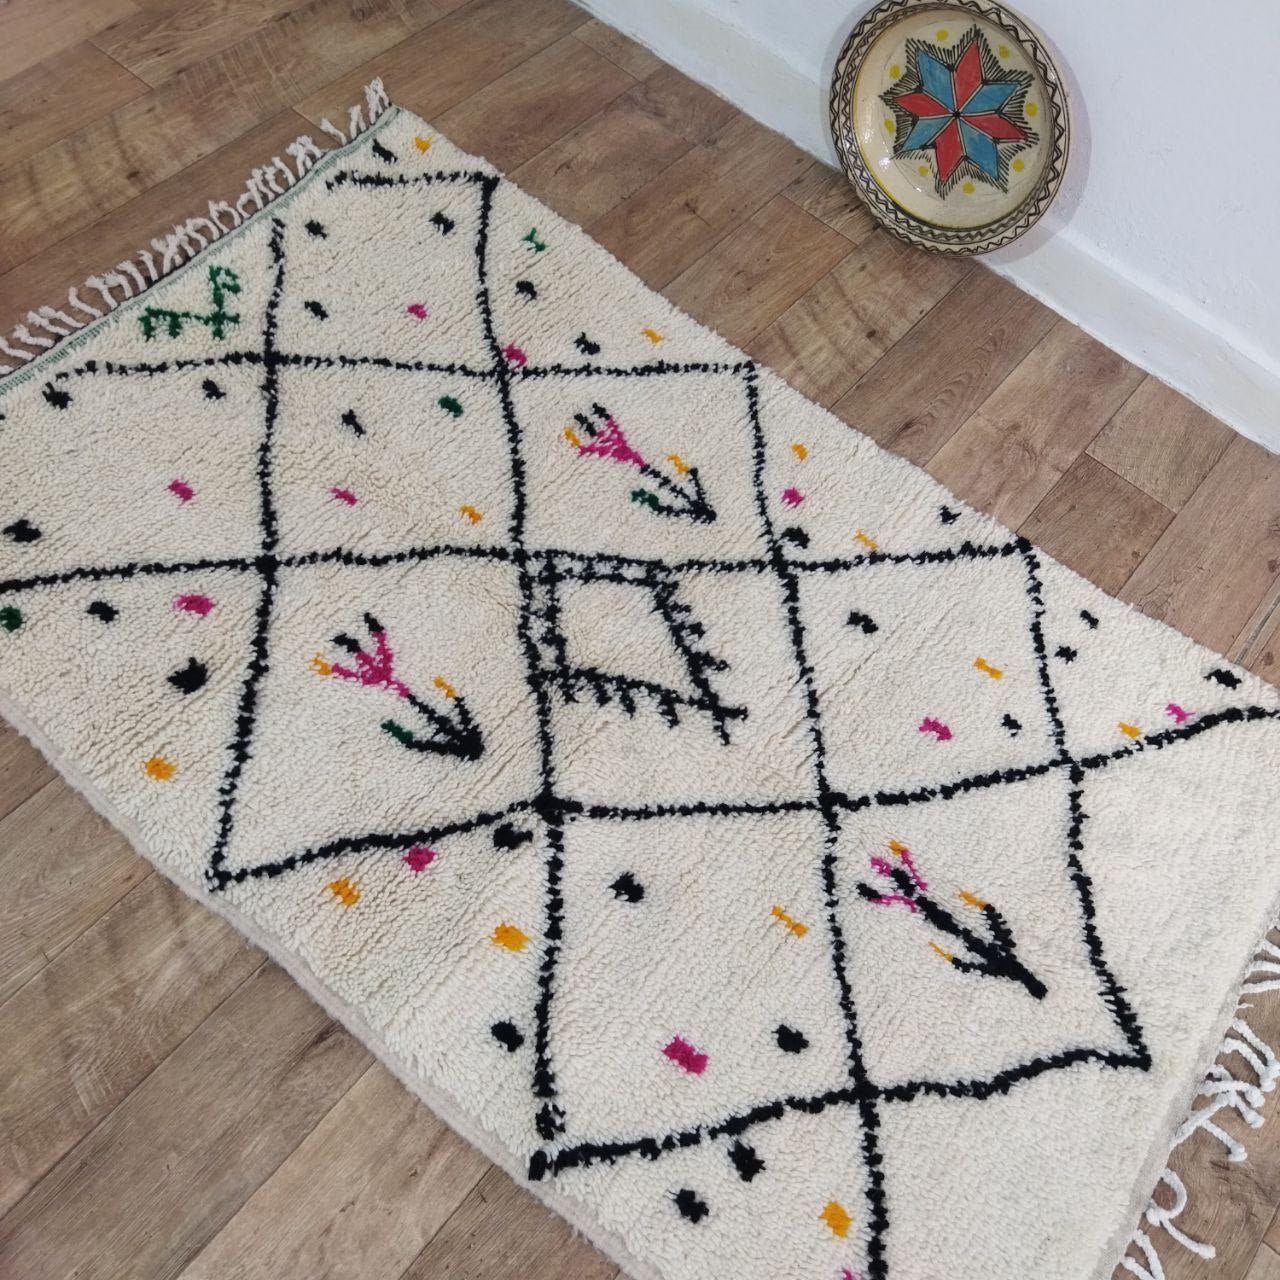 Authentic Azilal Berber Rugs - Handcrafted with Natural Wool Addition